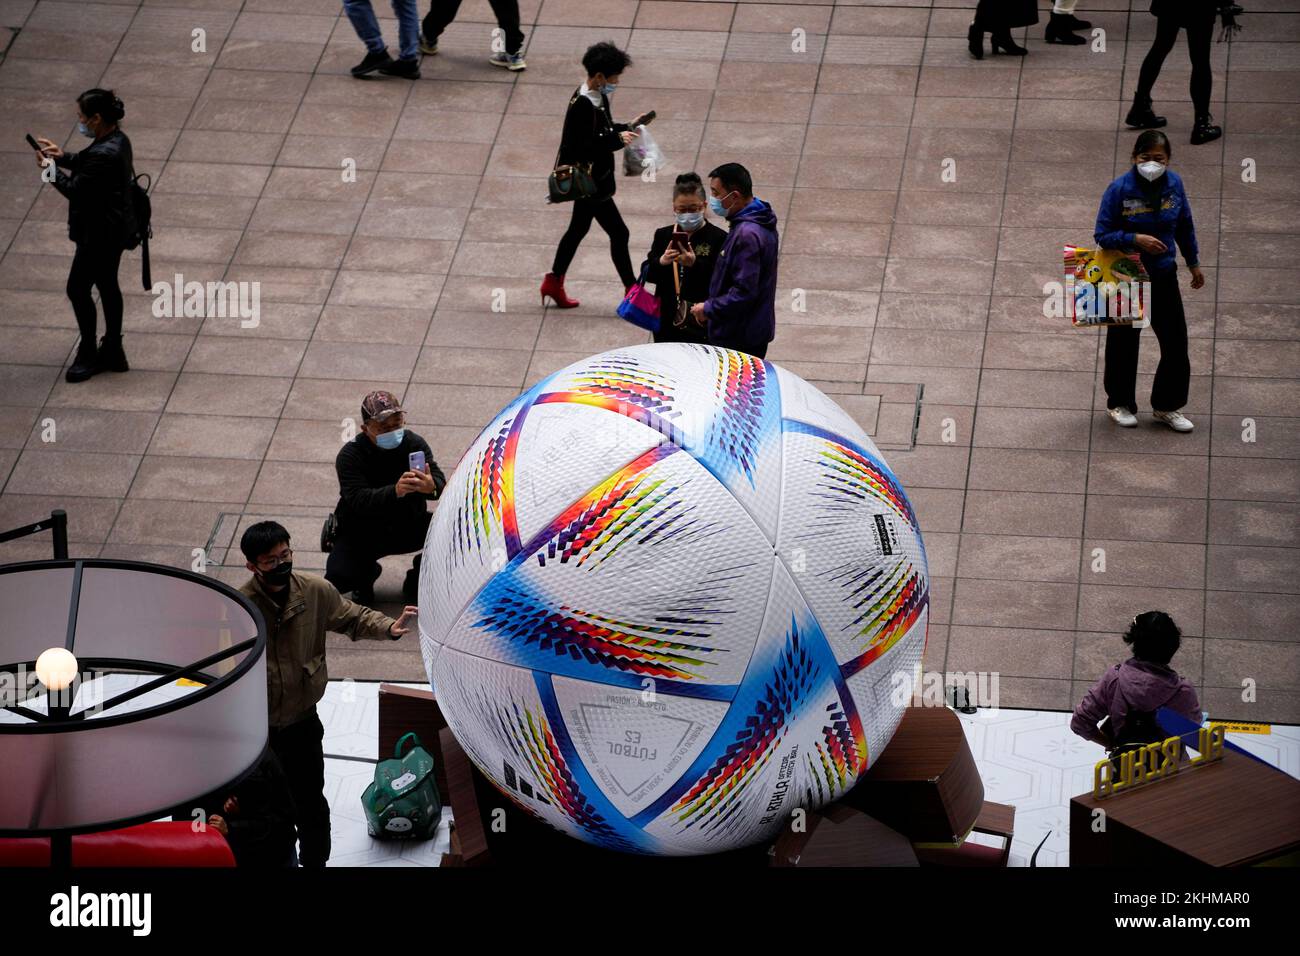 People wearing face masks look at the giant model of FIFA World Cup Qatar 2022 match ball, amid the coronavirus disease (COVID-19) outbreak in Shanghai, China, November 23, 2022. REUTERS/Aly Song Stock Photo